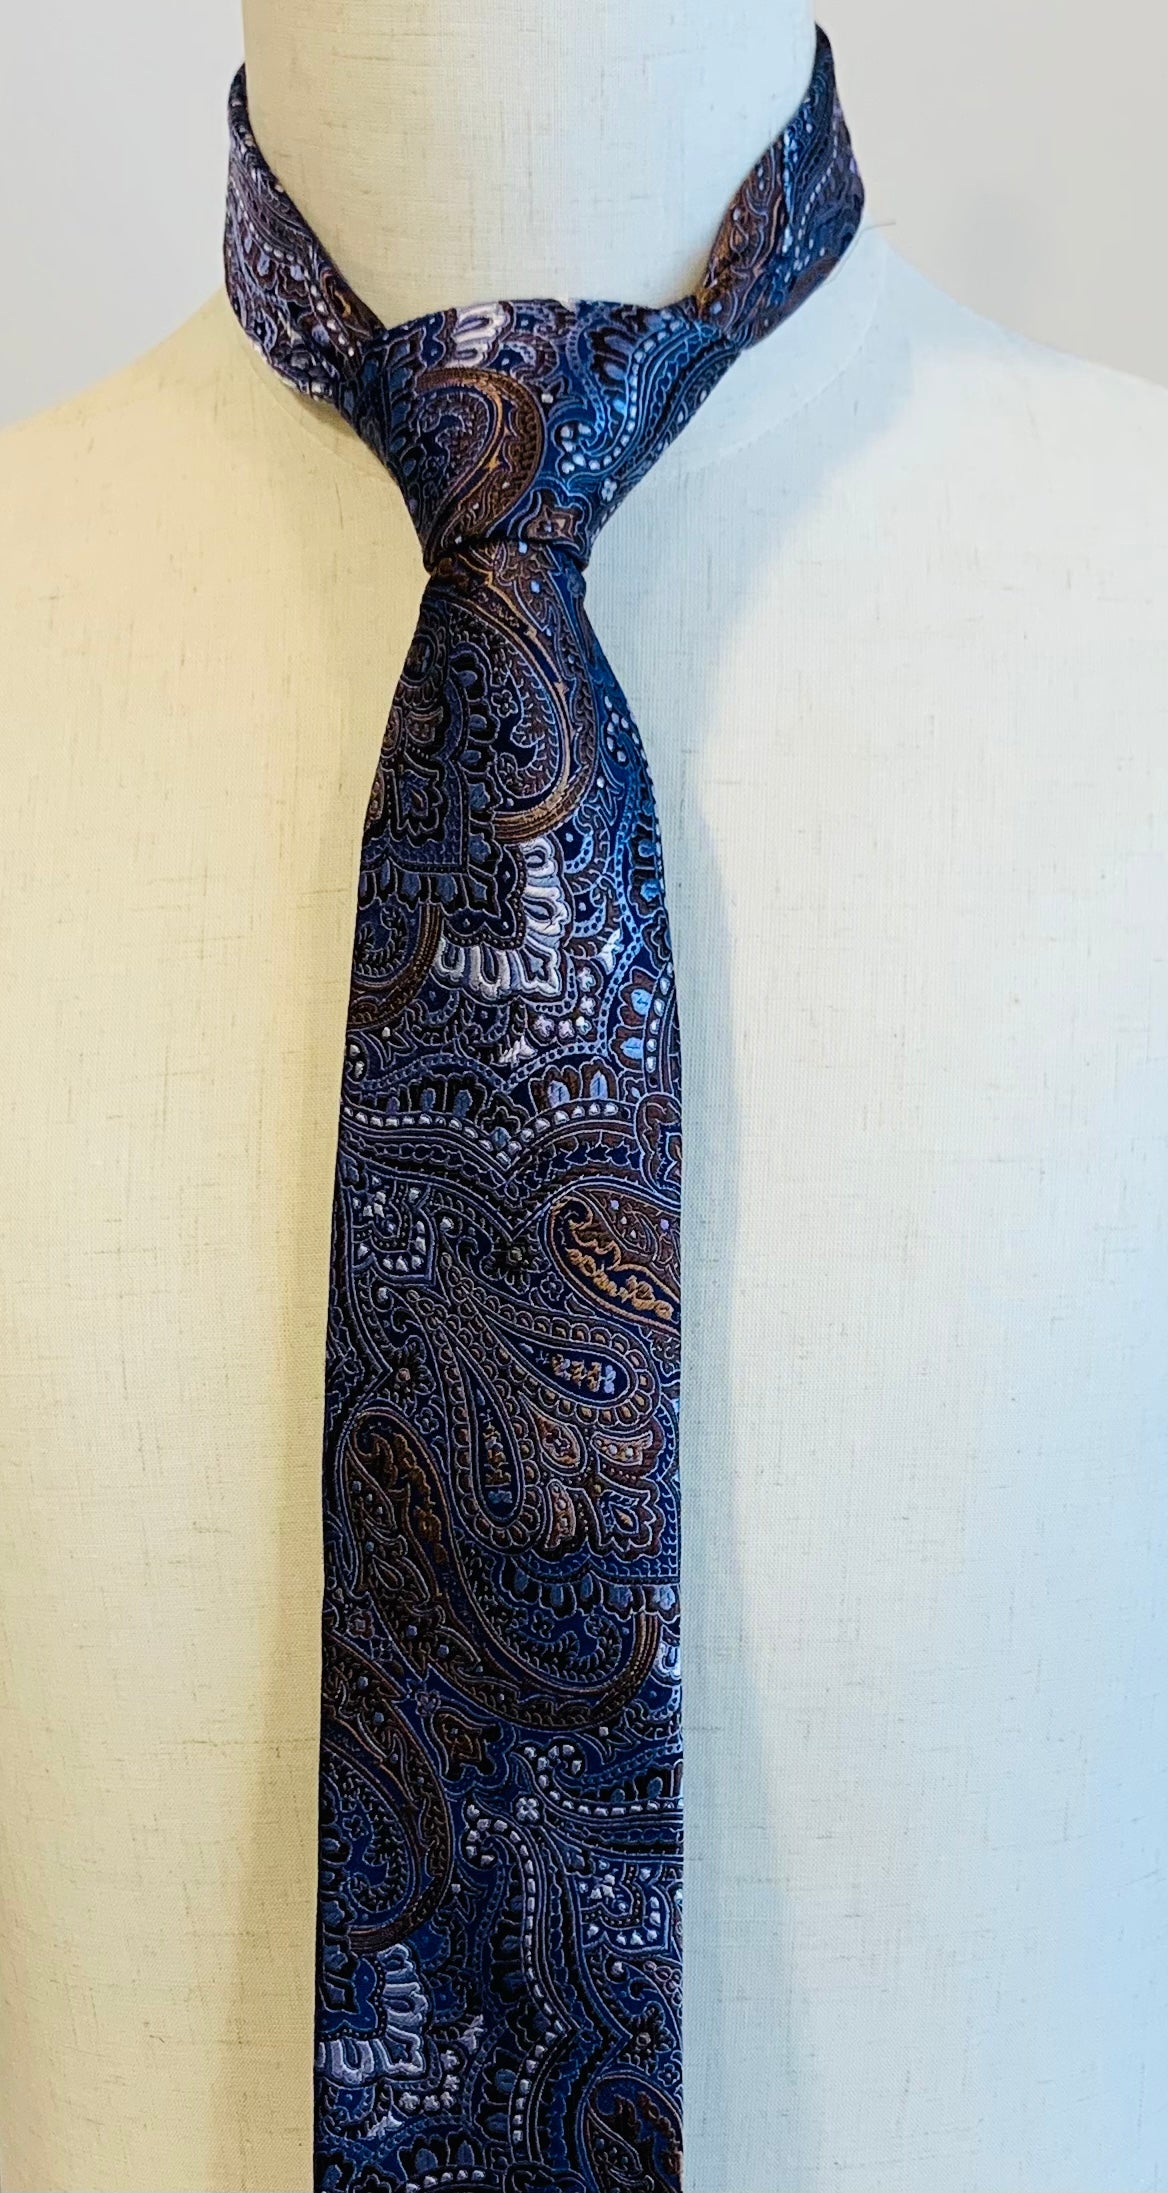 Serica brown and blue paisley tie